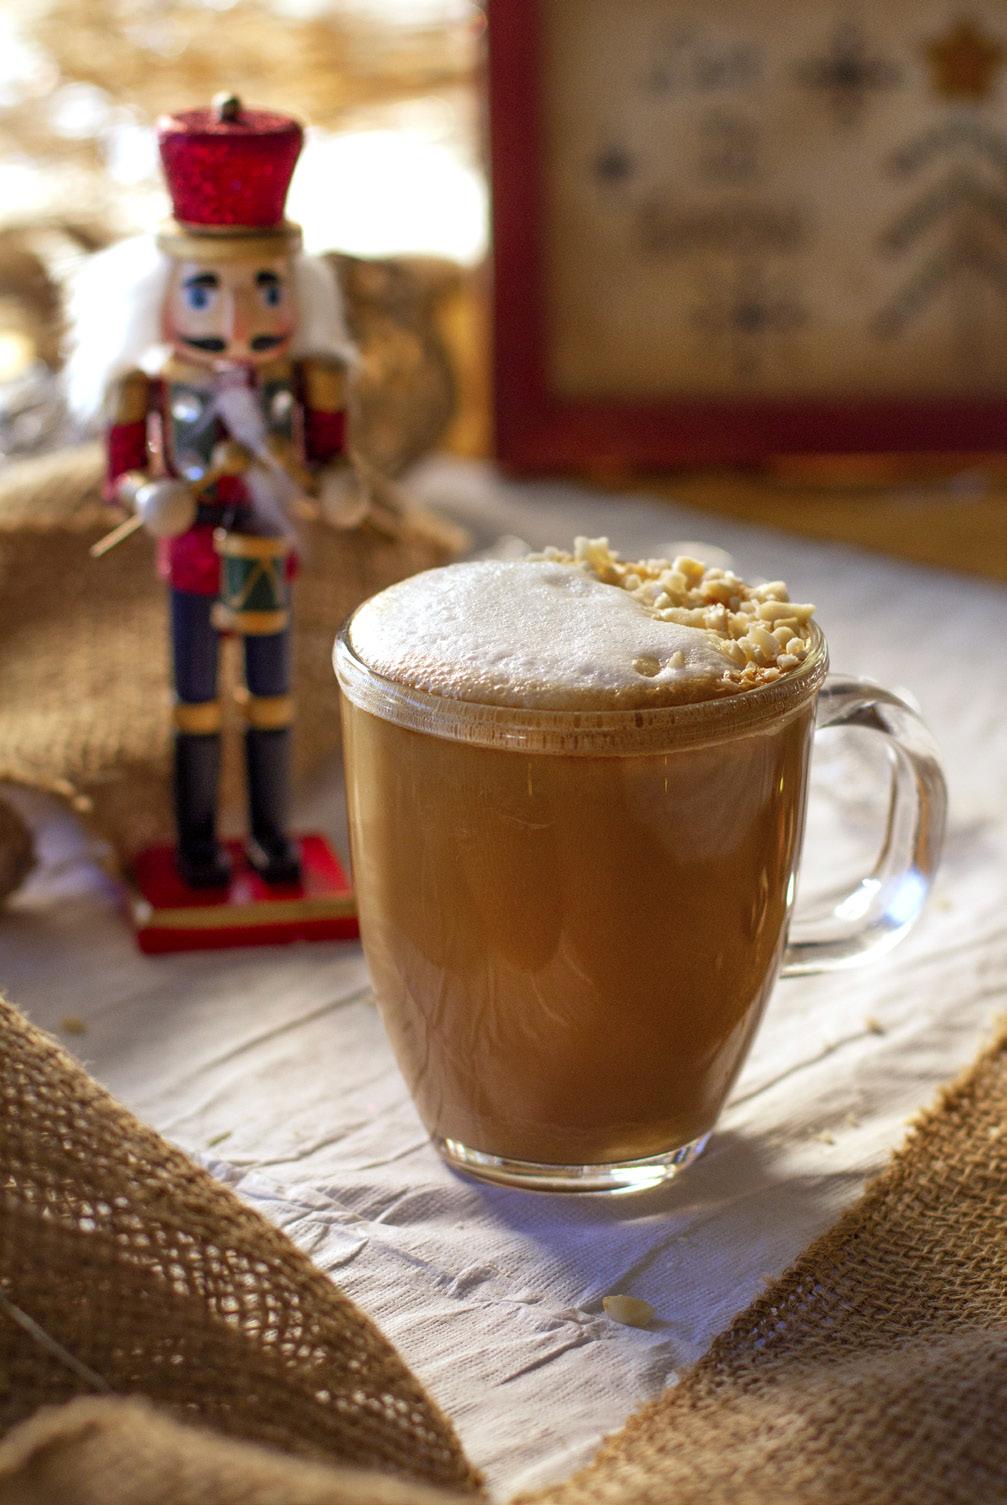 Nutcracker Latte Fit for fantastic tales and sprinkled with a little holiday magic, this rich brew contains raw-pressed macadamia nut milk, sweet hazelnut and espresso. Yield: 1, 12 oz.